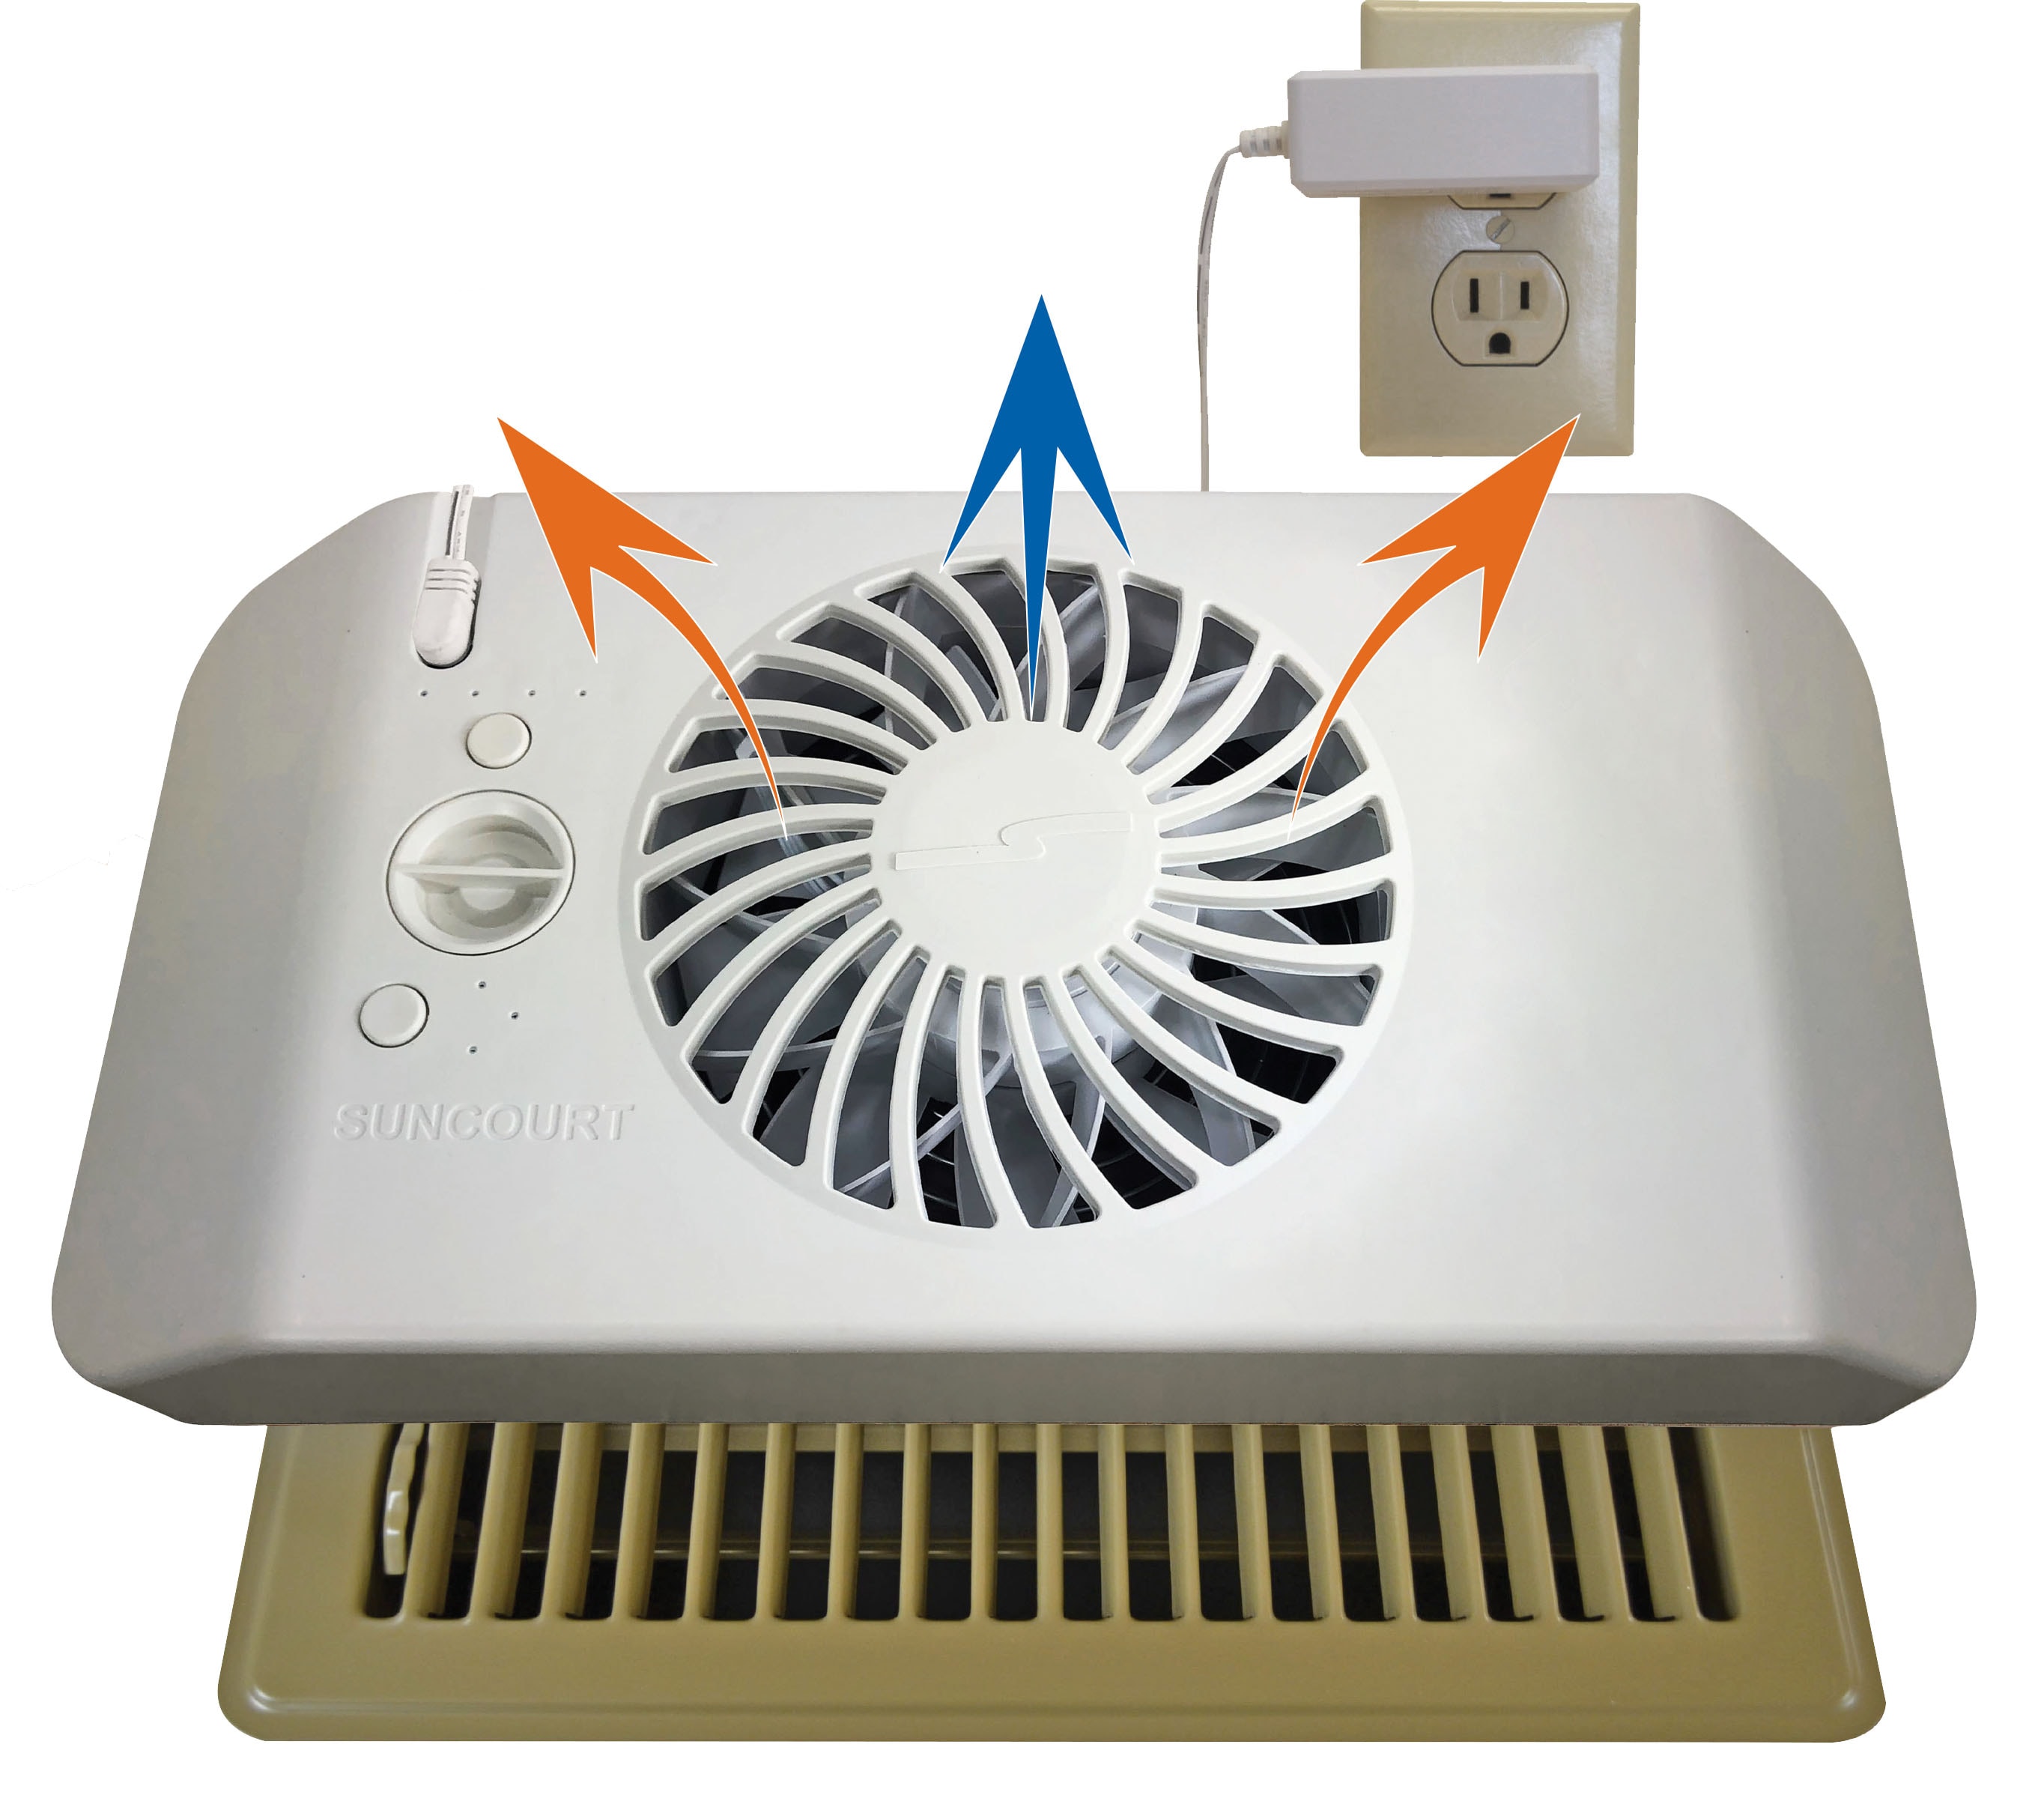 Airbrick Smart 4 x 10 AC Vent Register Booster Fan with Remote Control  and Thermostat. Enhances HVAC Airflow for Heating, Cooling in Bedroom and